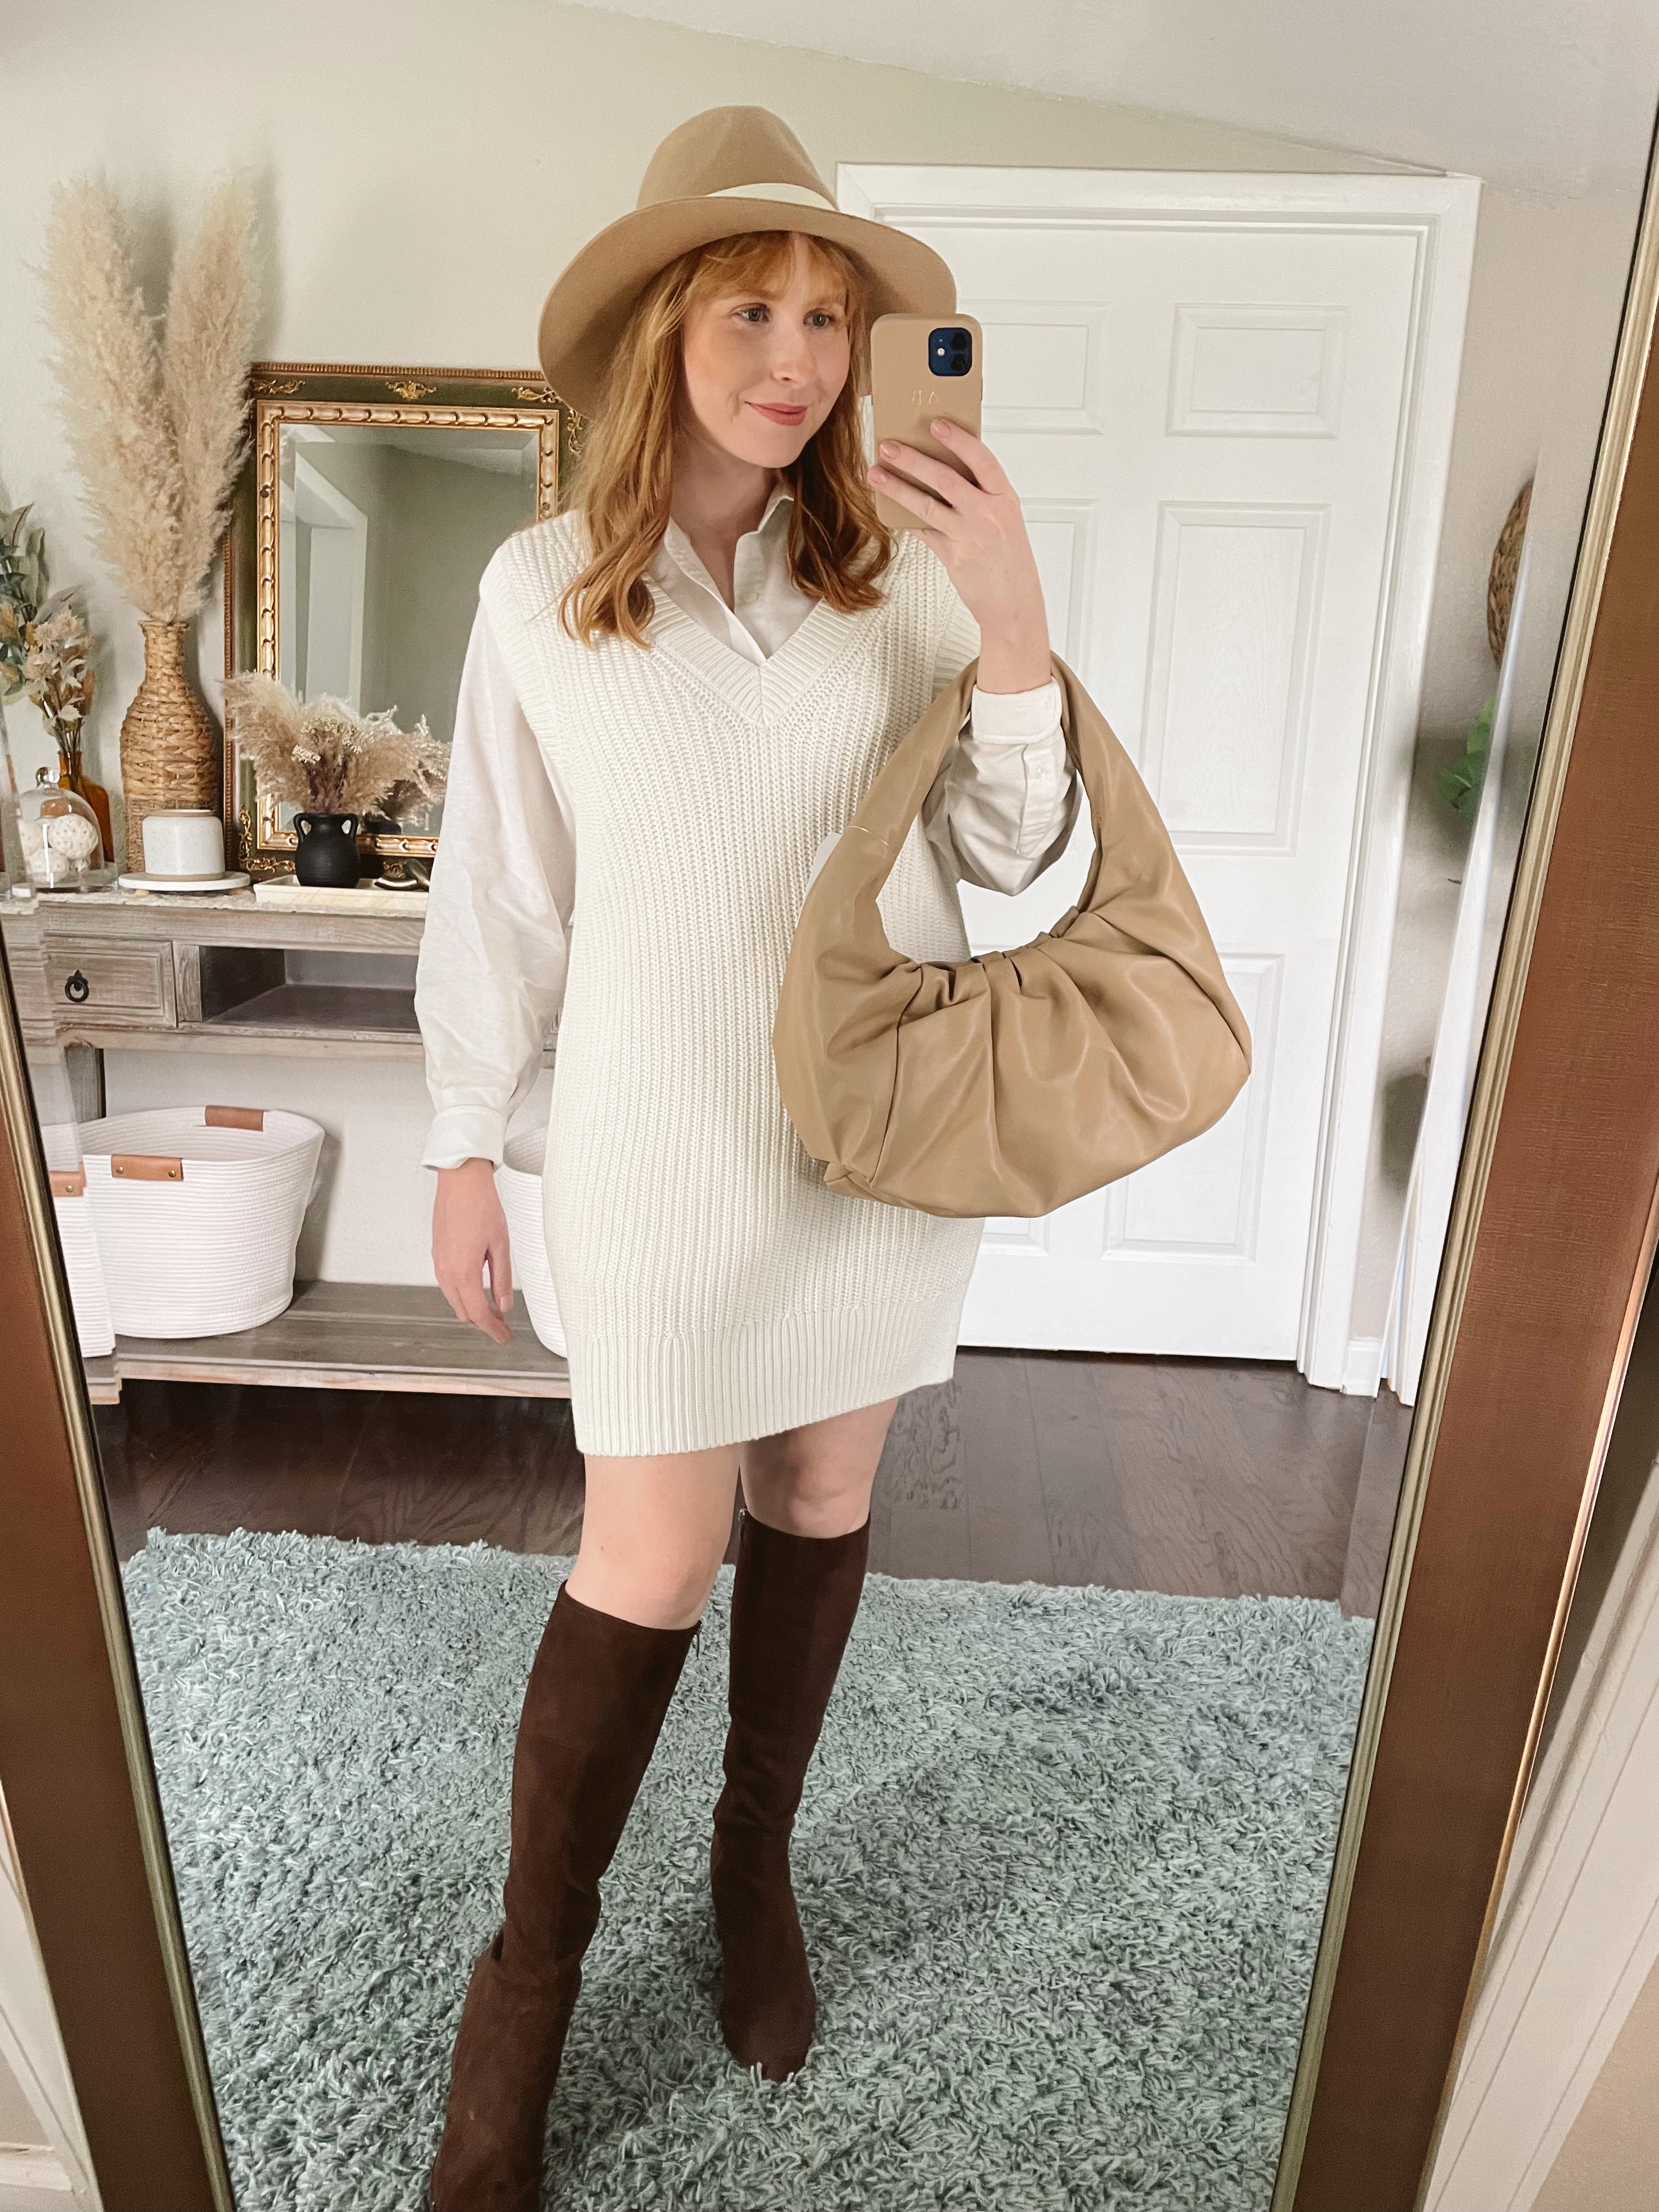 Abercrombie & Fitch Women’s Sweater Vest Mini Dress - Affordable by Amanda, Tampa Style Blog shares 10 Affordable Fall Must Haves